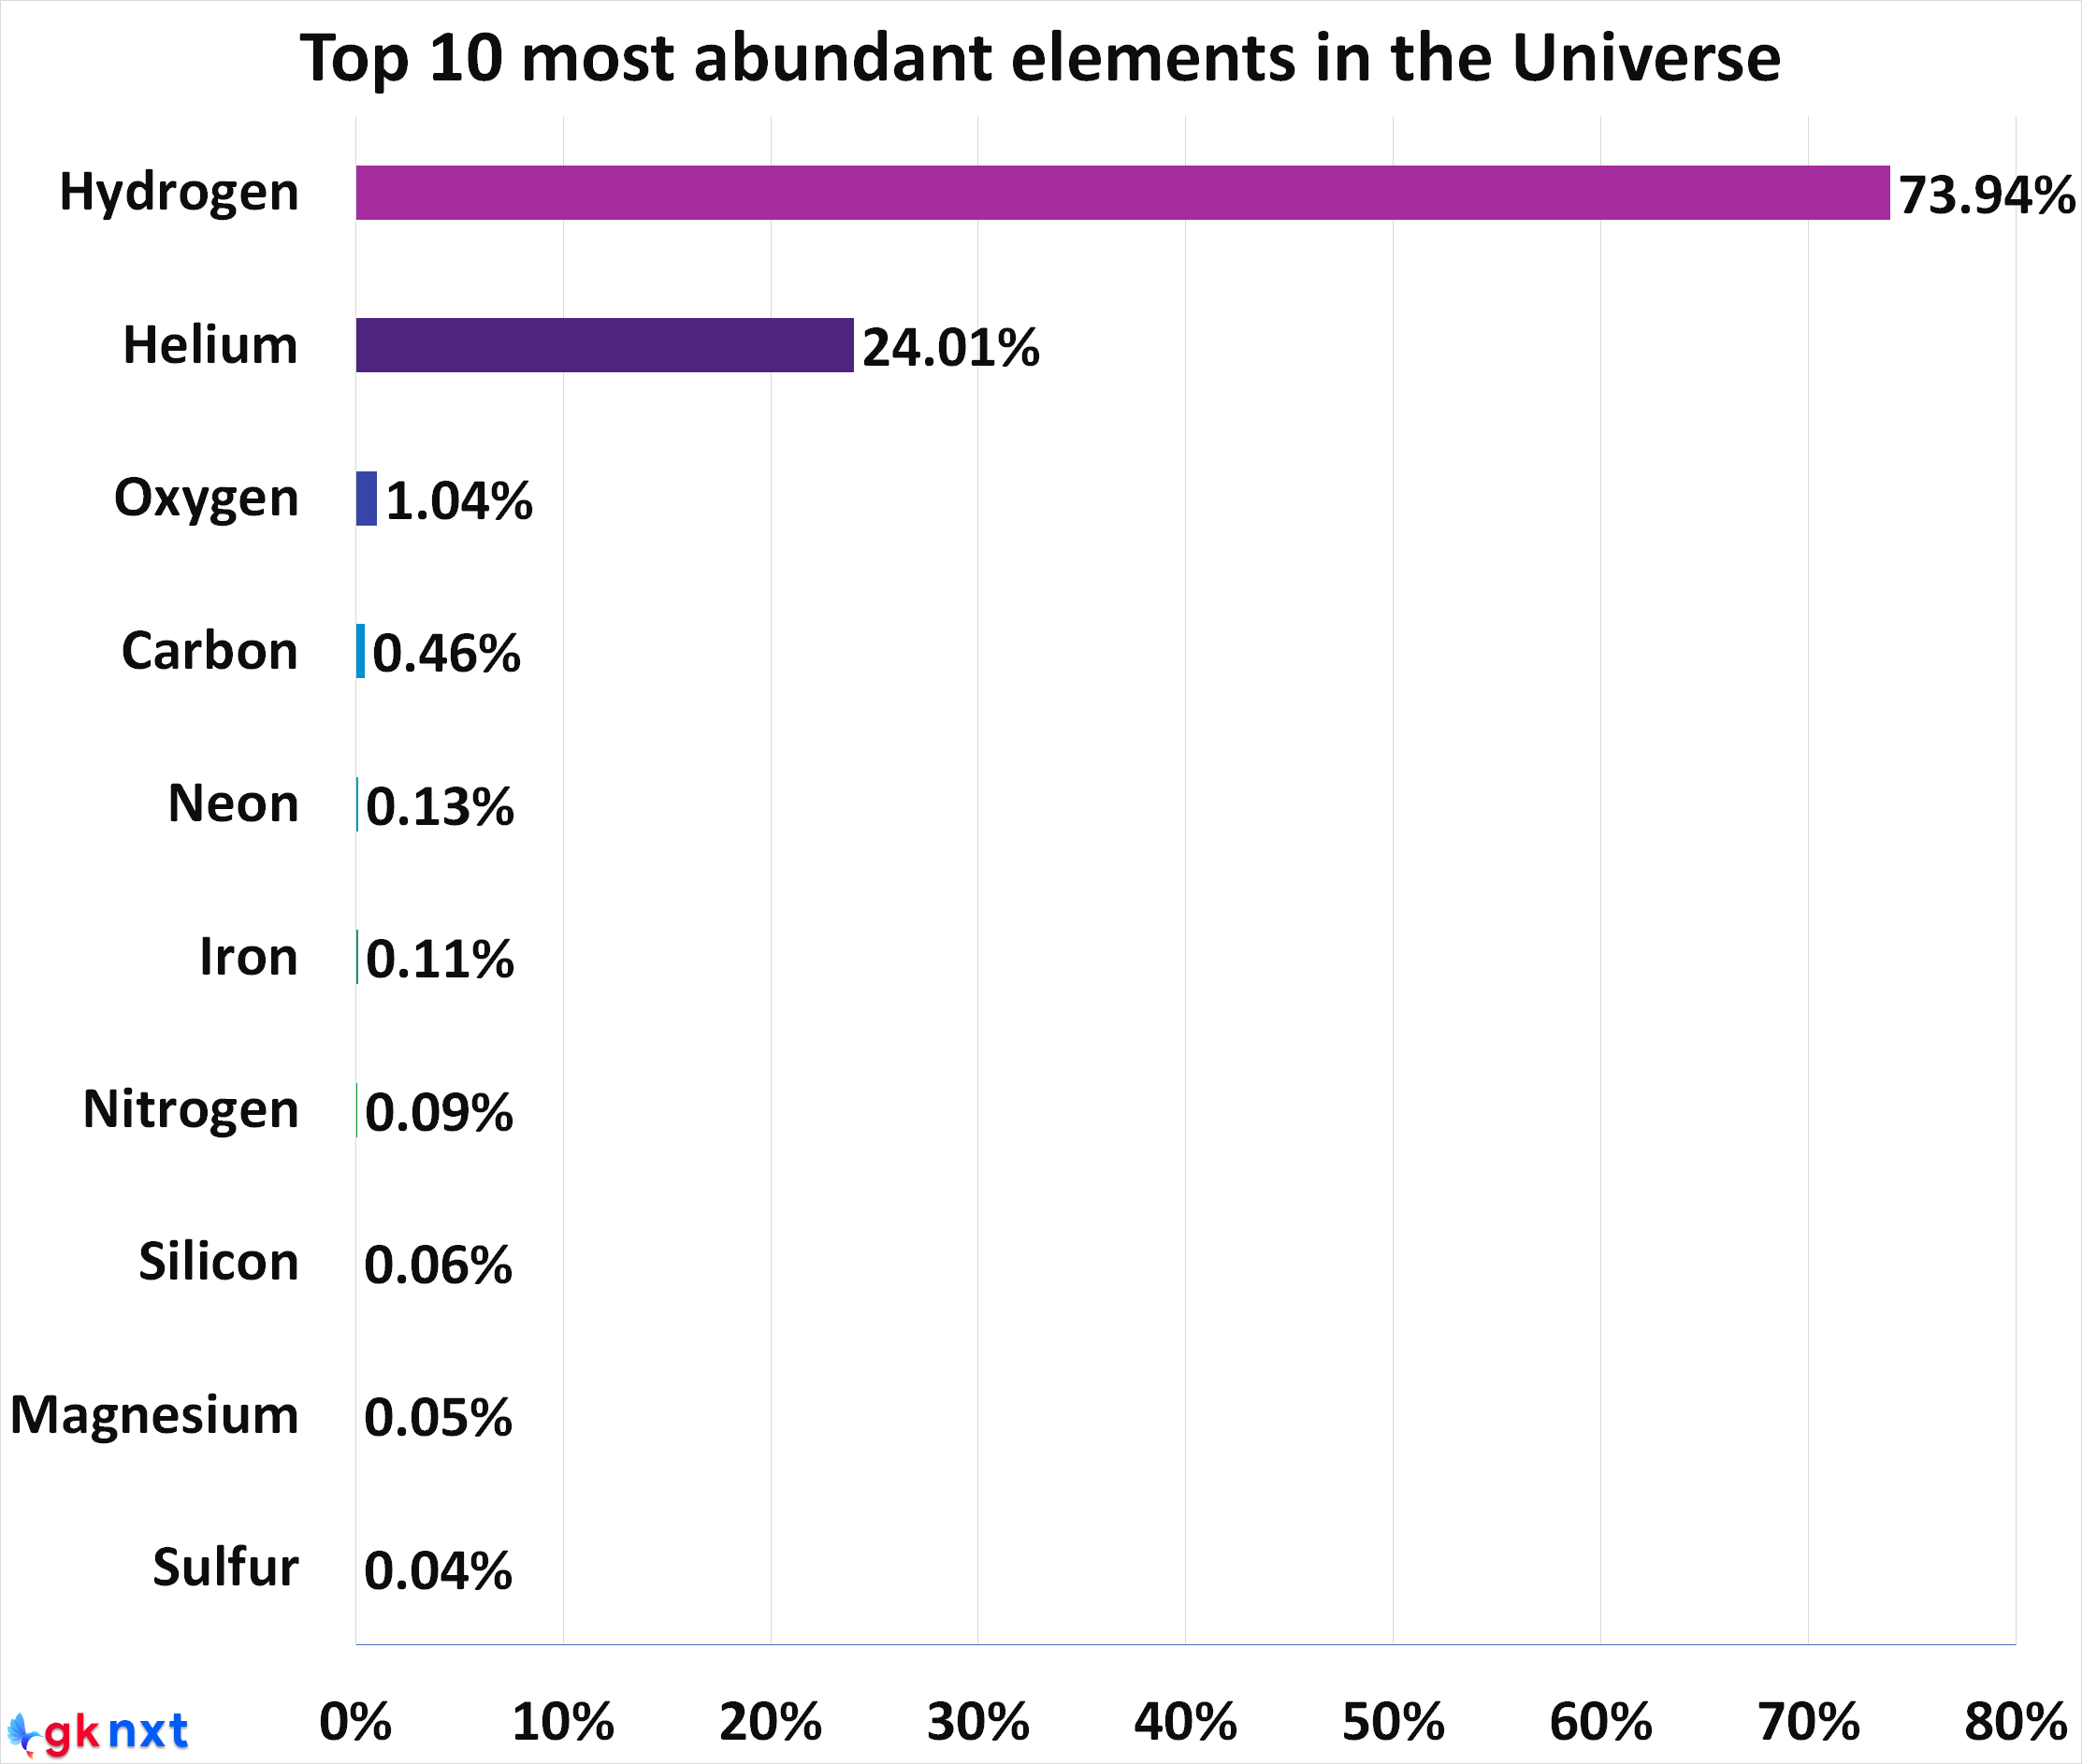 Top 10 most abundant elements in the universe